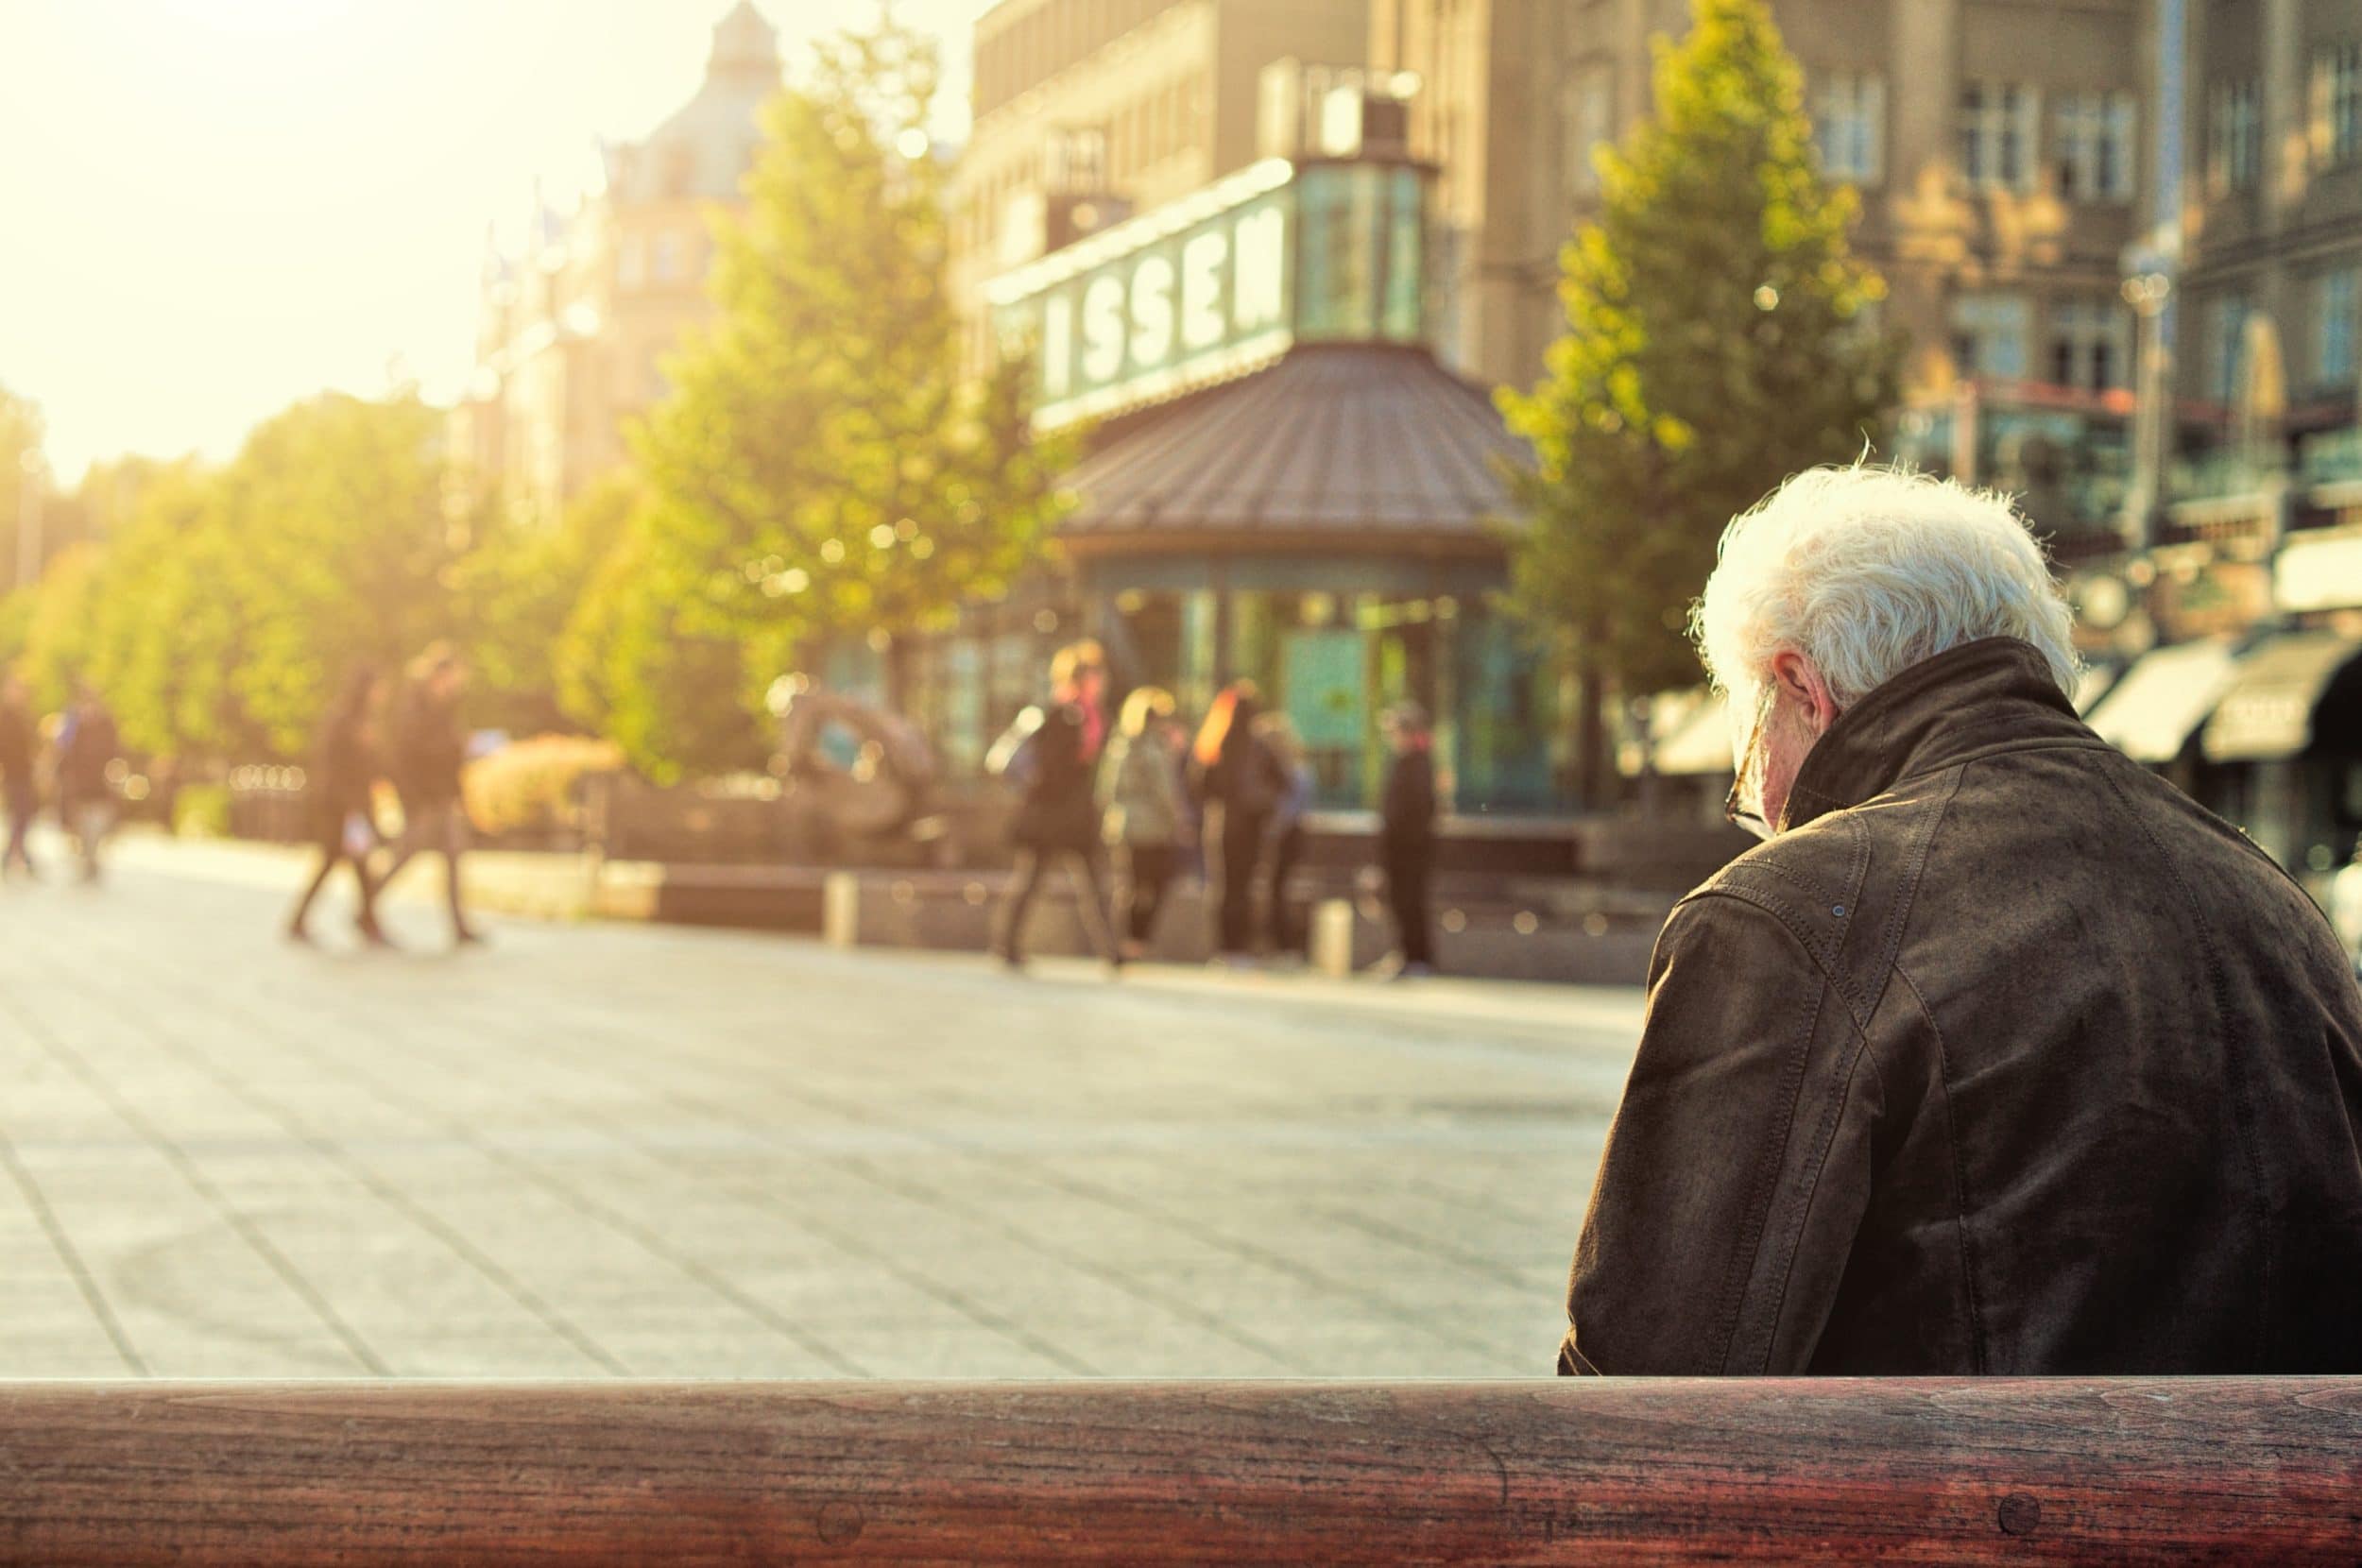 older adult senior affected by loneliness and depression at the holidays sits alone on bench